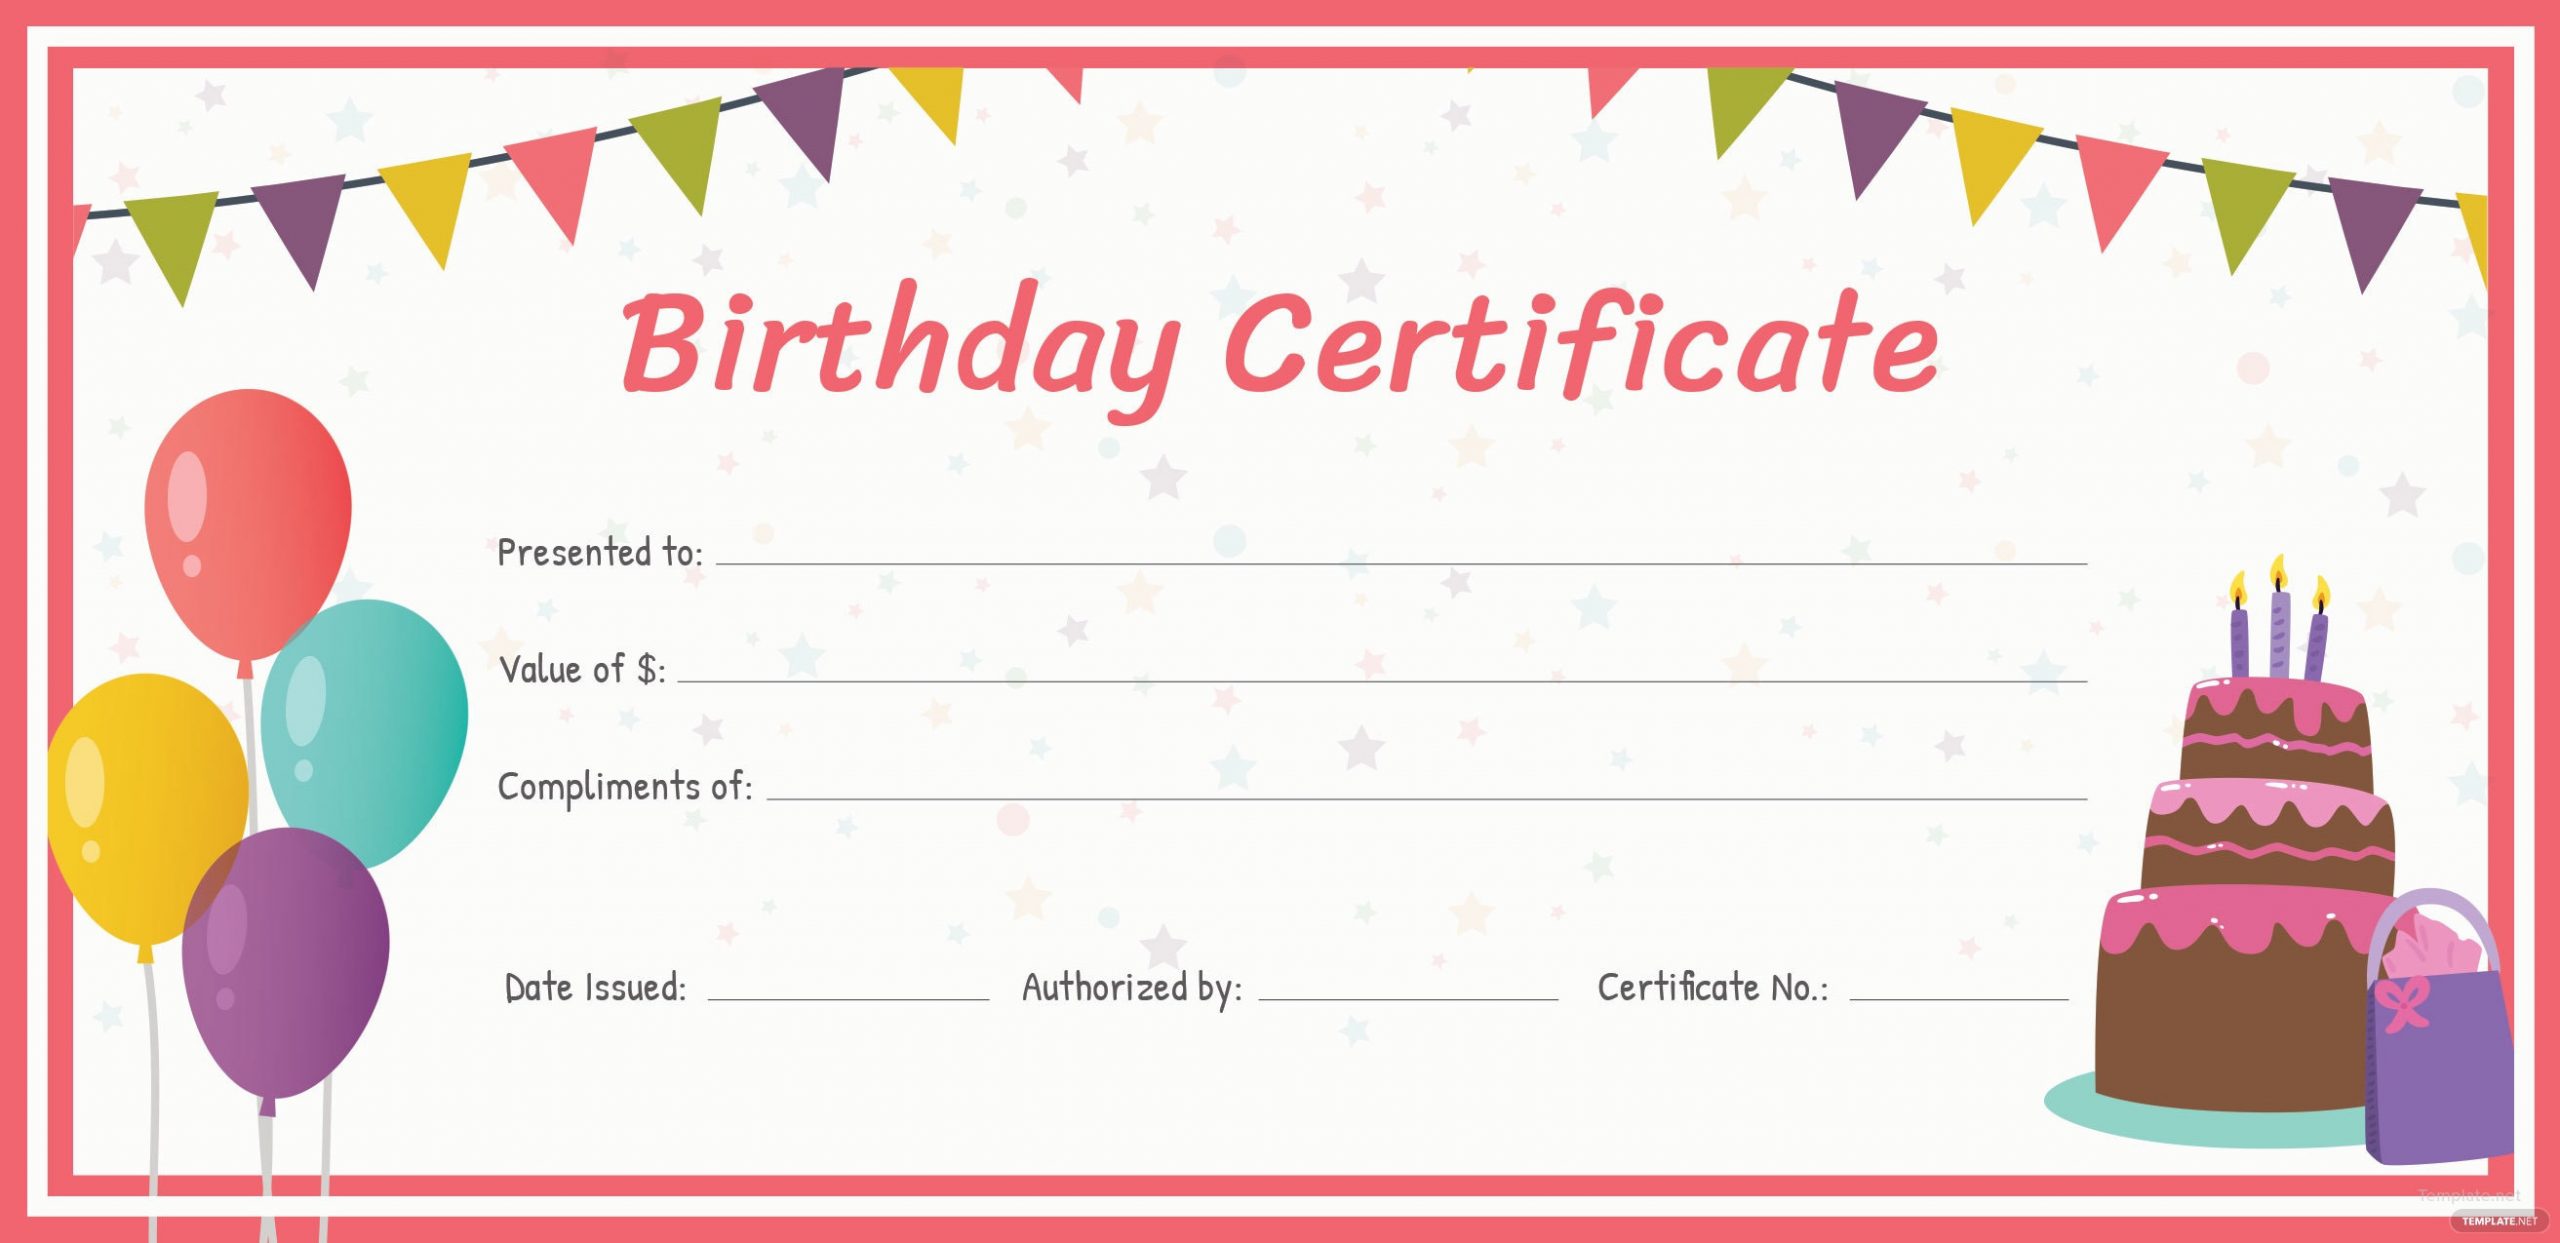 Birthday Gift Certificate Template Free Birthday Gift Certificate Template In Adobe